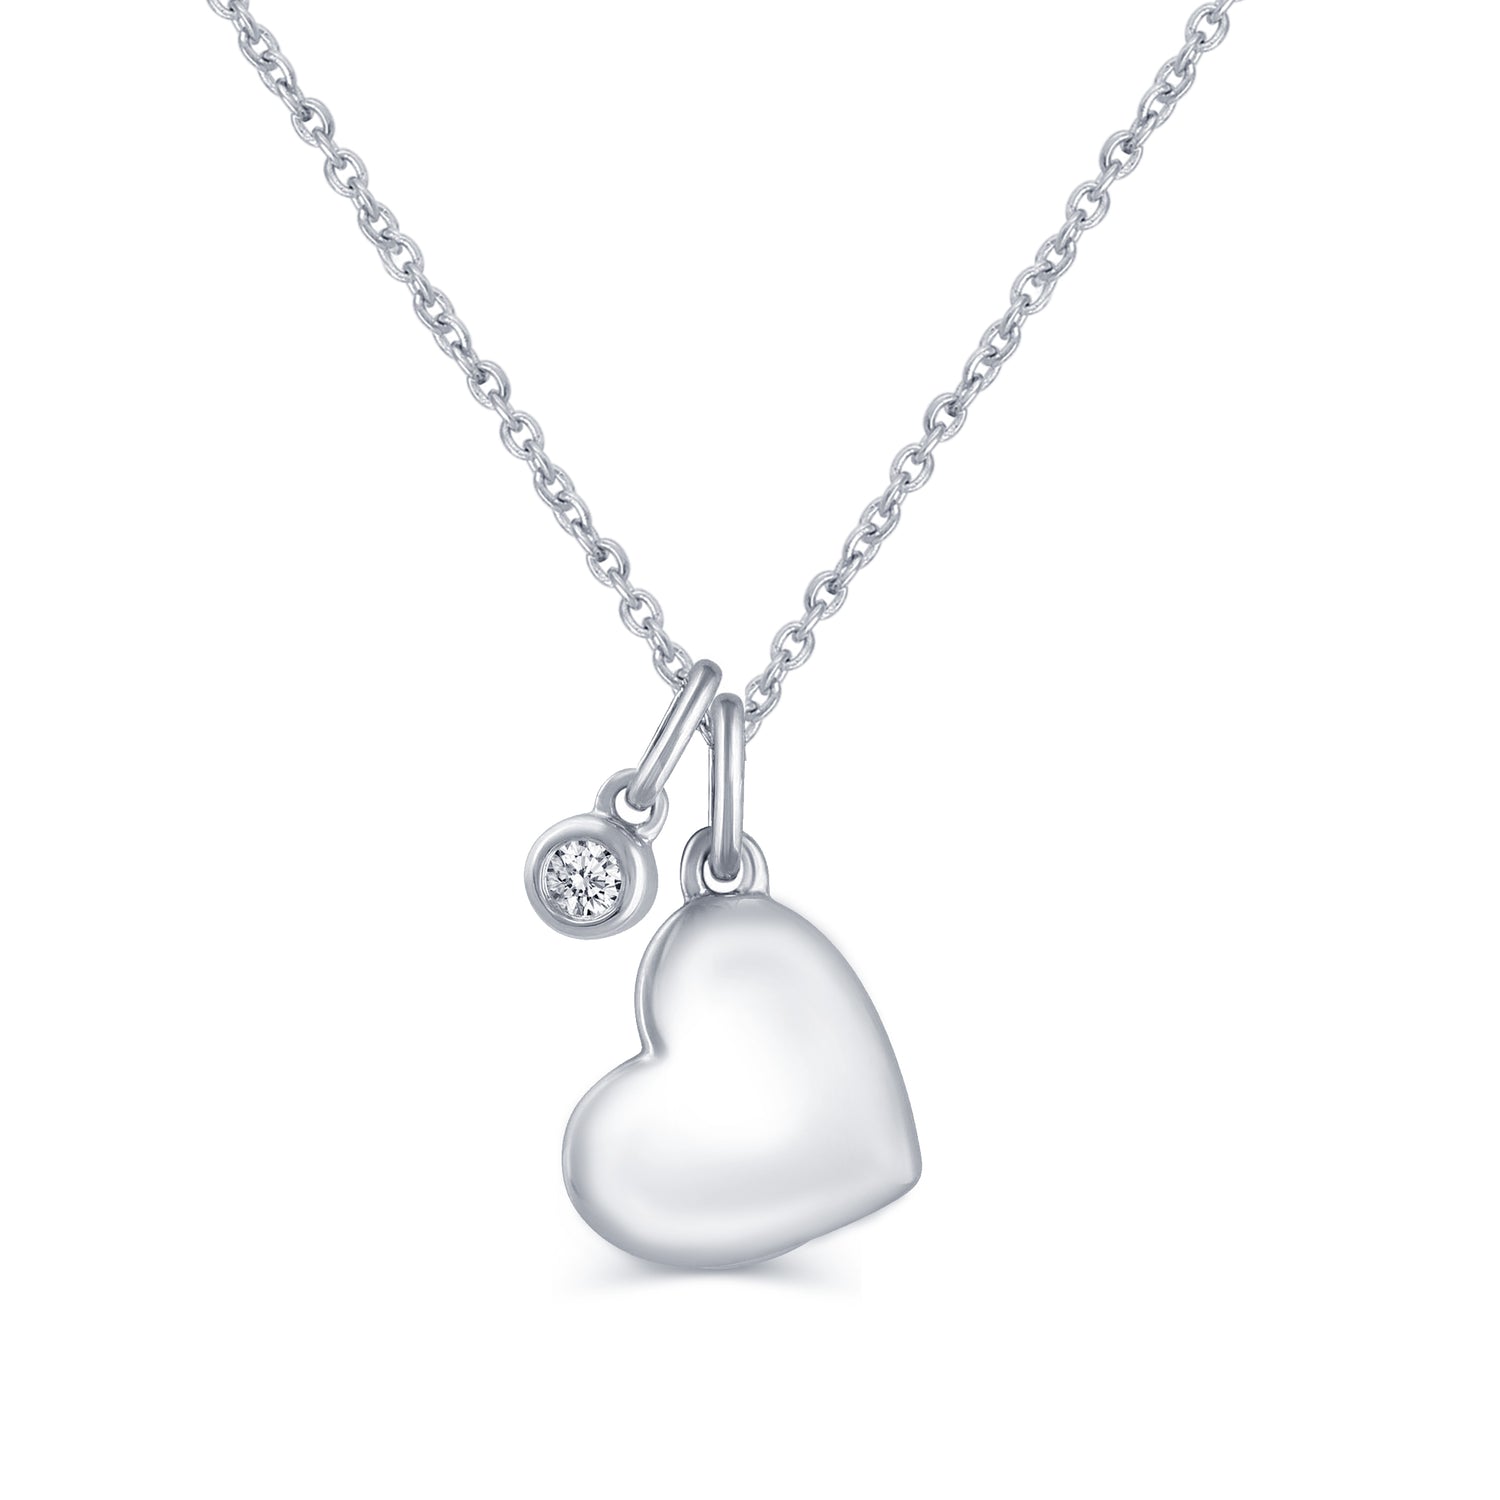 1/20 Carat tw Natural Diamond Puff Floating Heart Shape Pendant Necklace in 925 Sterling Silver fine jewelry gift holiday love birthday